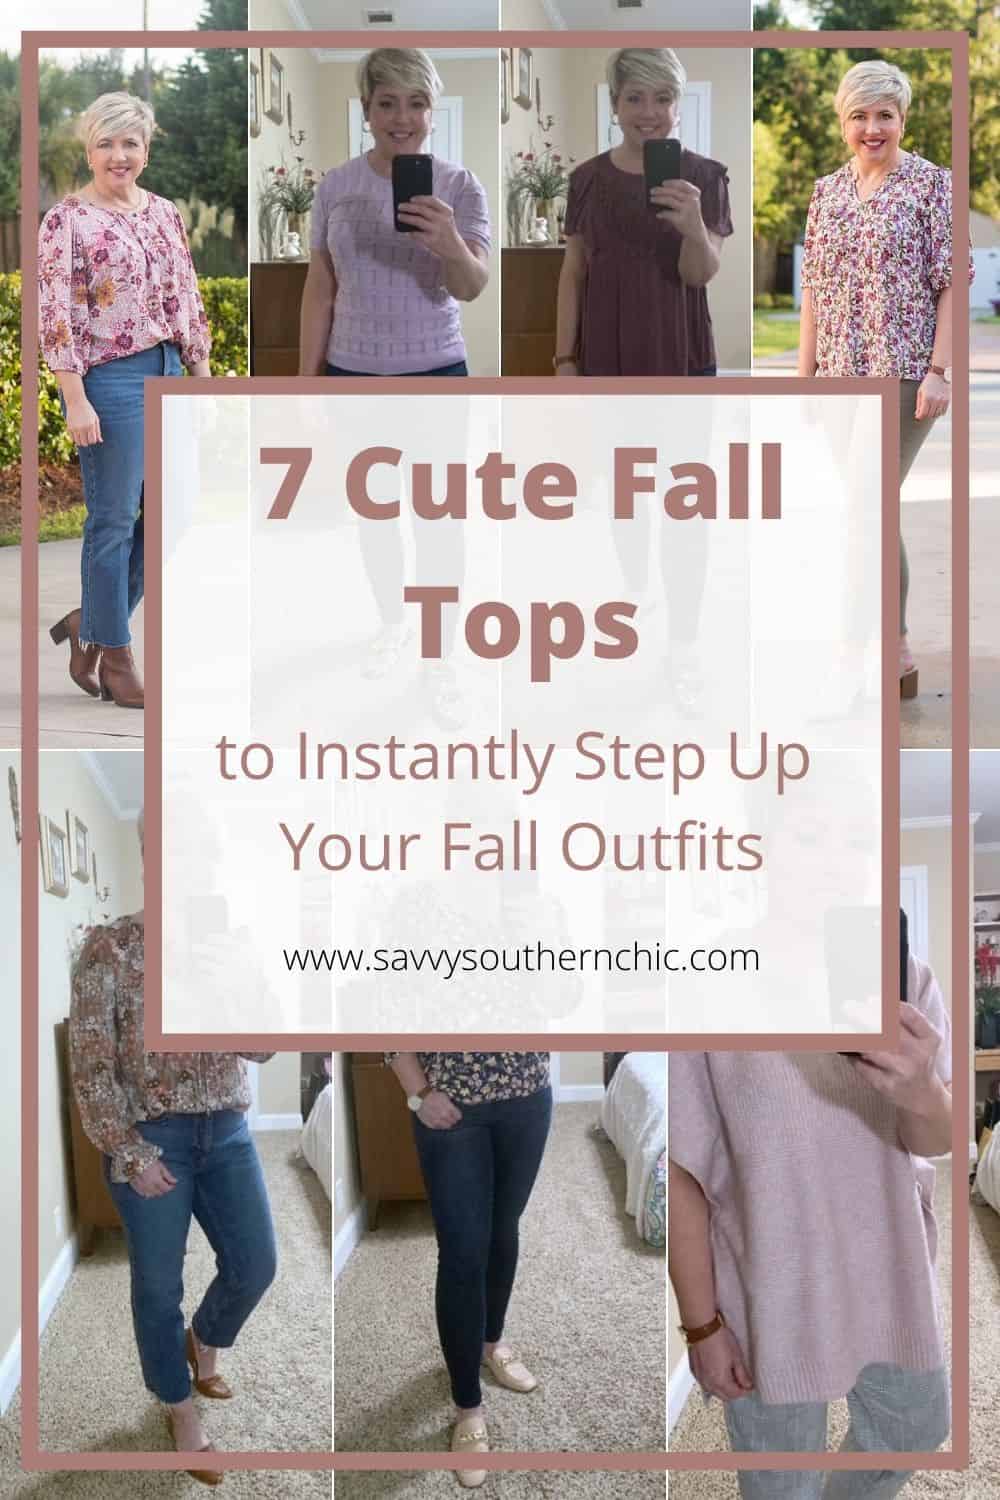 7 Cute Fall Shirts to Instantly Step Up Your Outfits